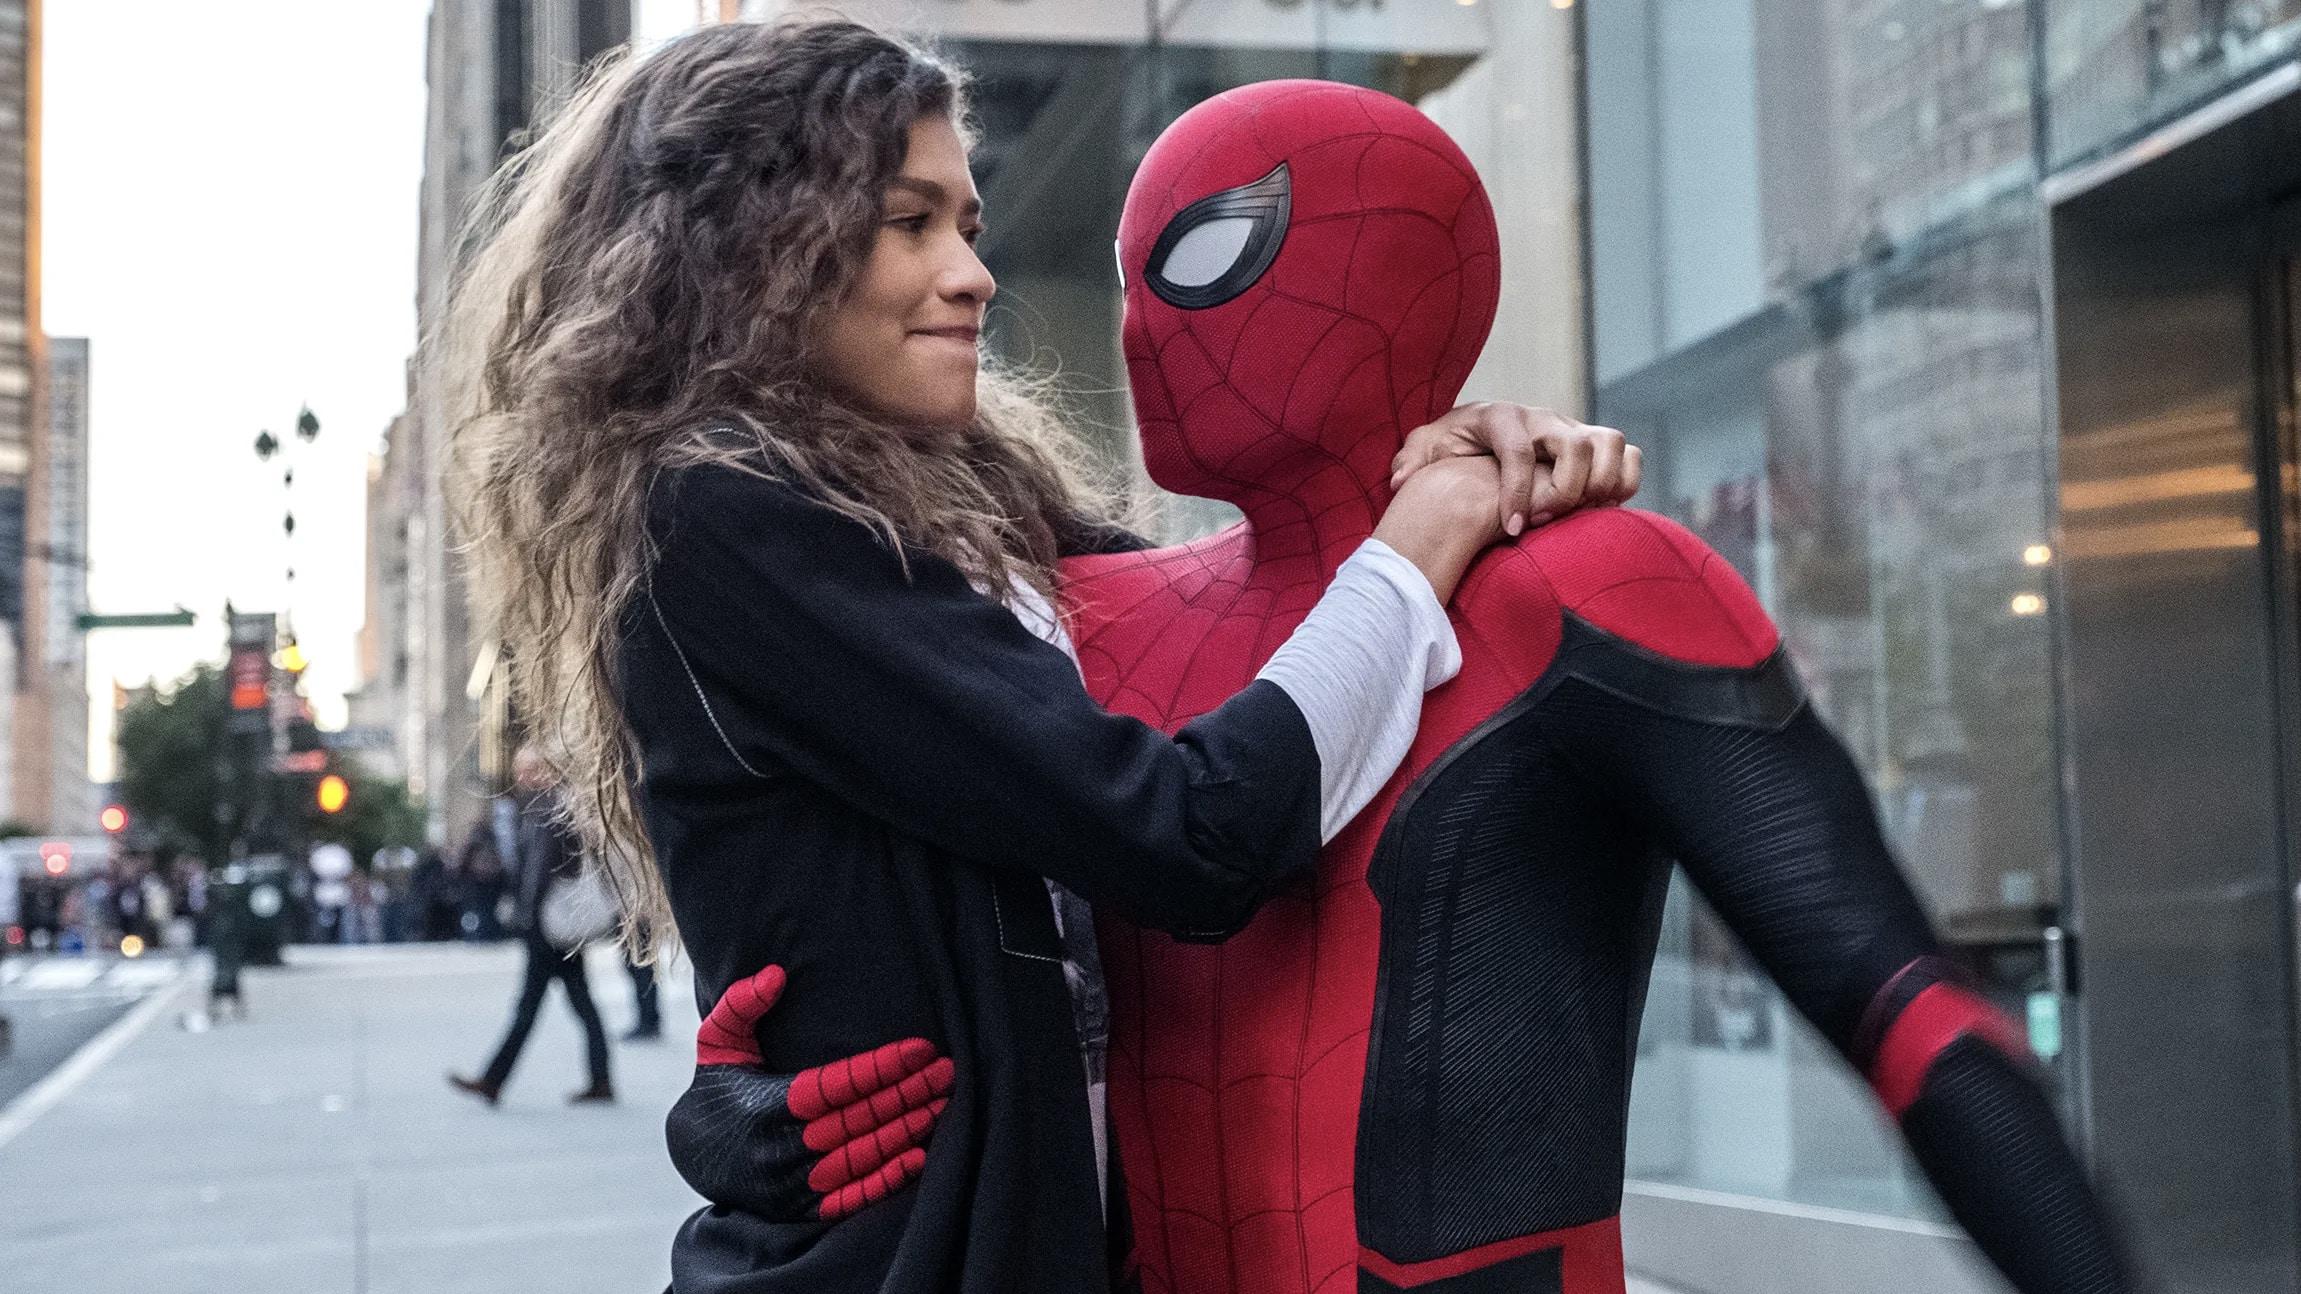 zendaya-and-tom-holland-in-marvel-cinematic-universe-phase-3-movie-spiderman-far-from-home